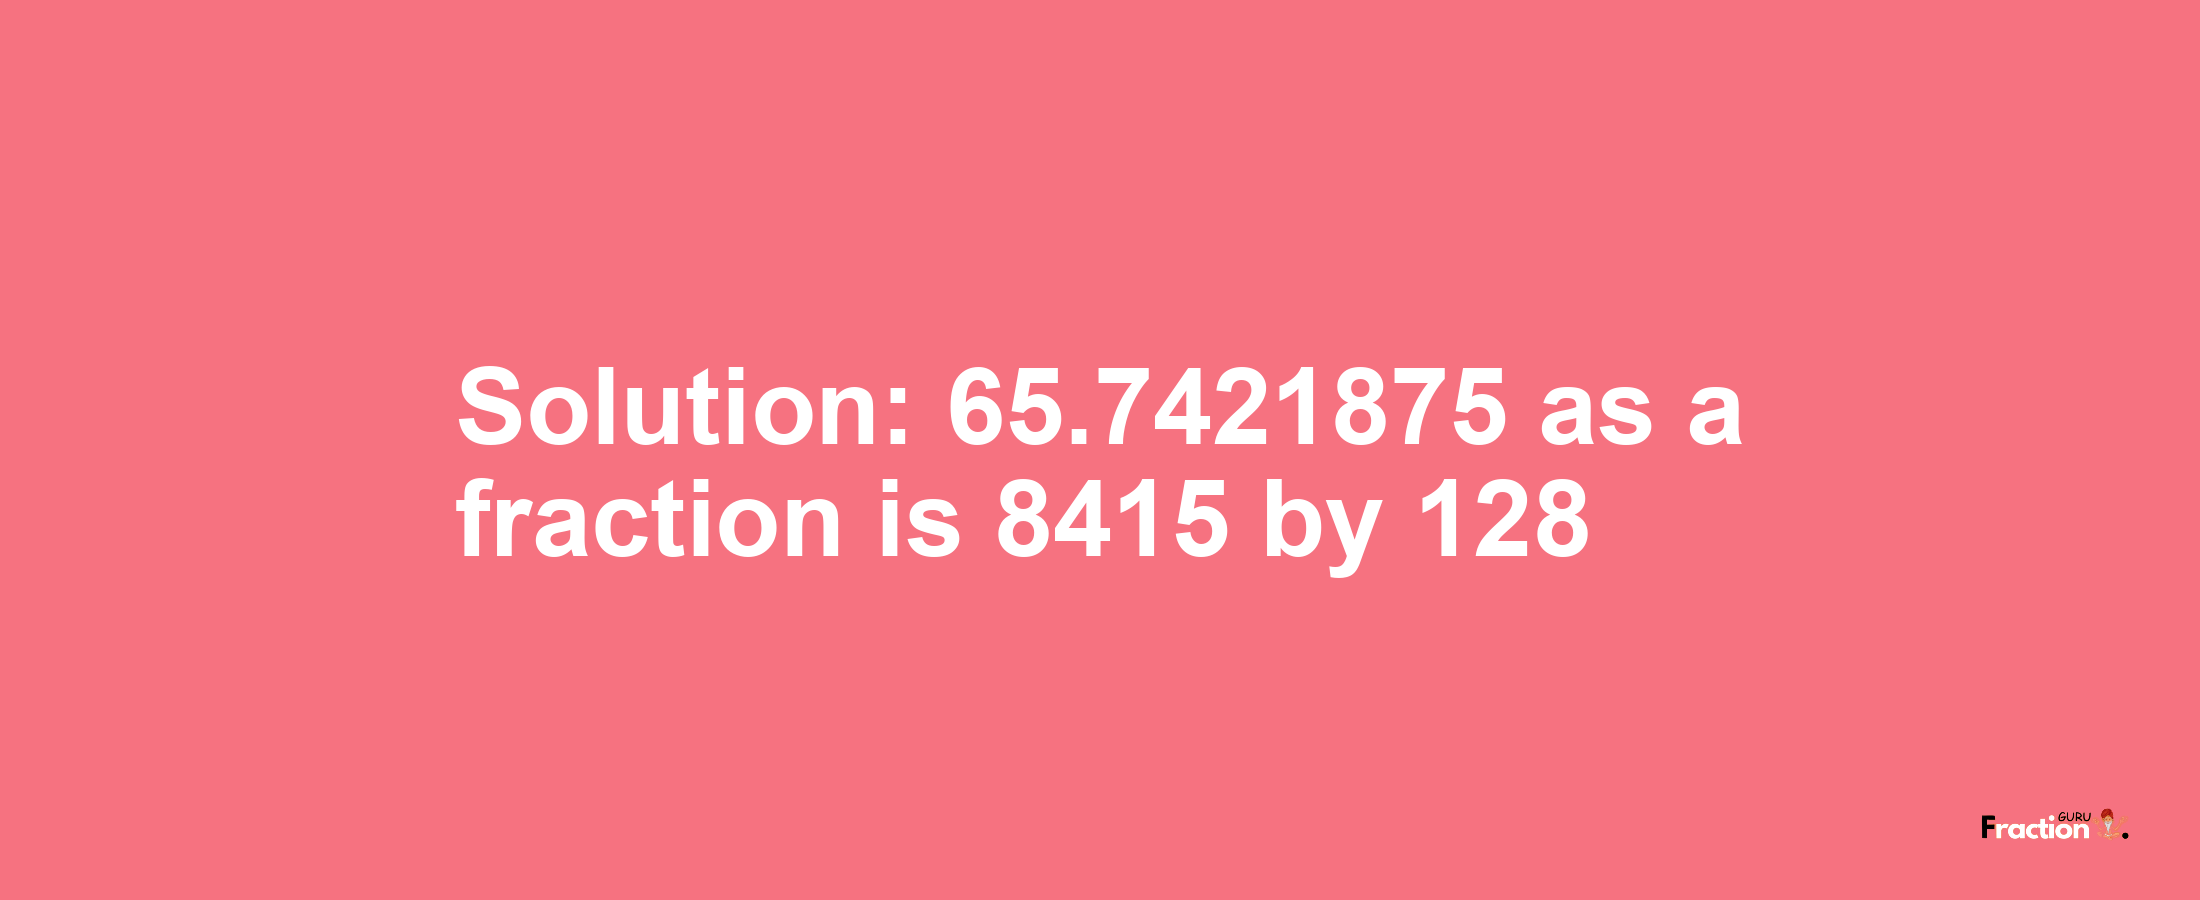 Solution:65.7421875 as a fraction is 8415/128